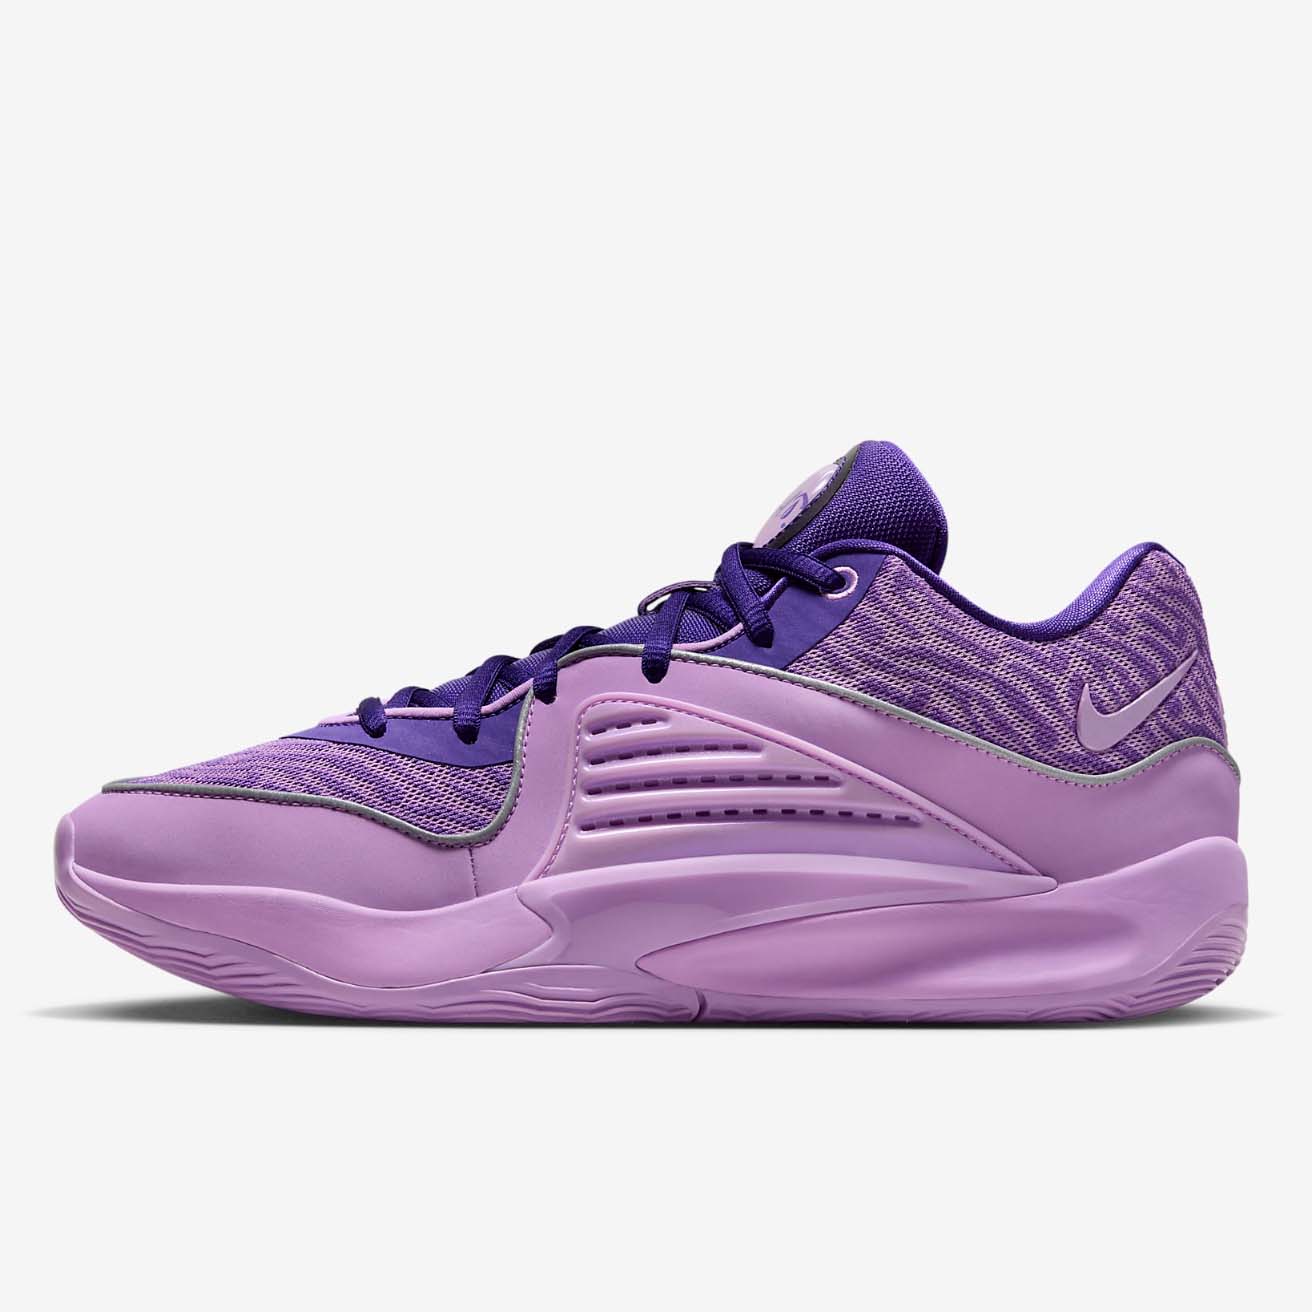 KD16 "B.A.D." basketball shoes in purple